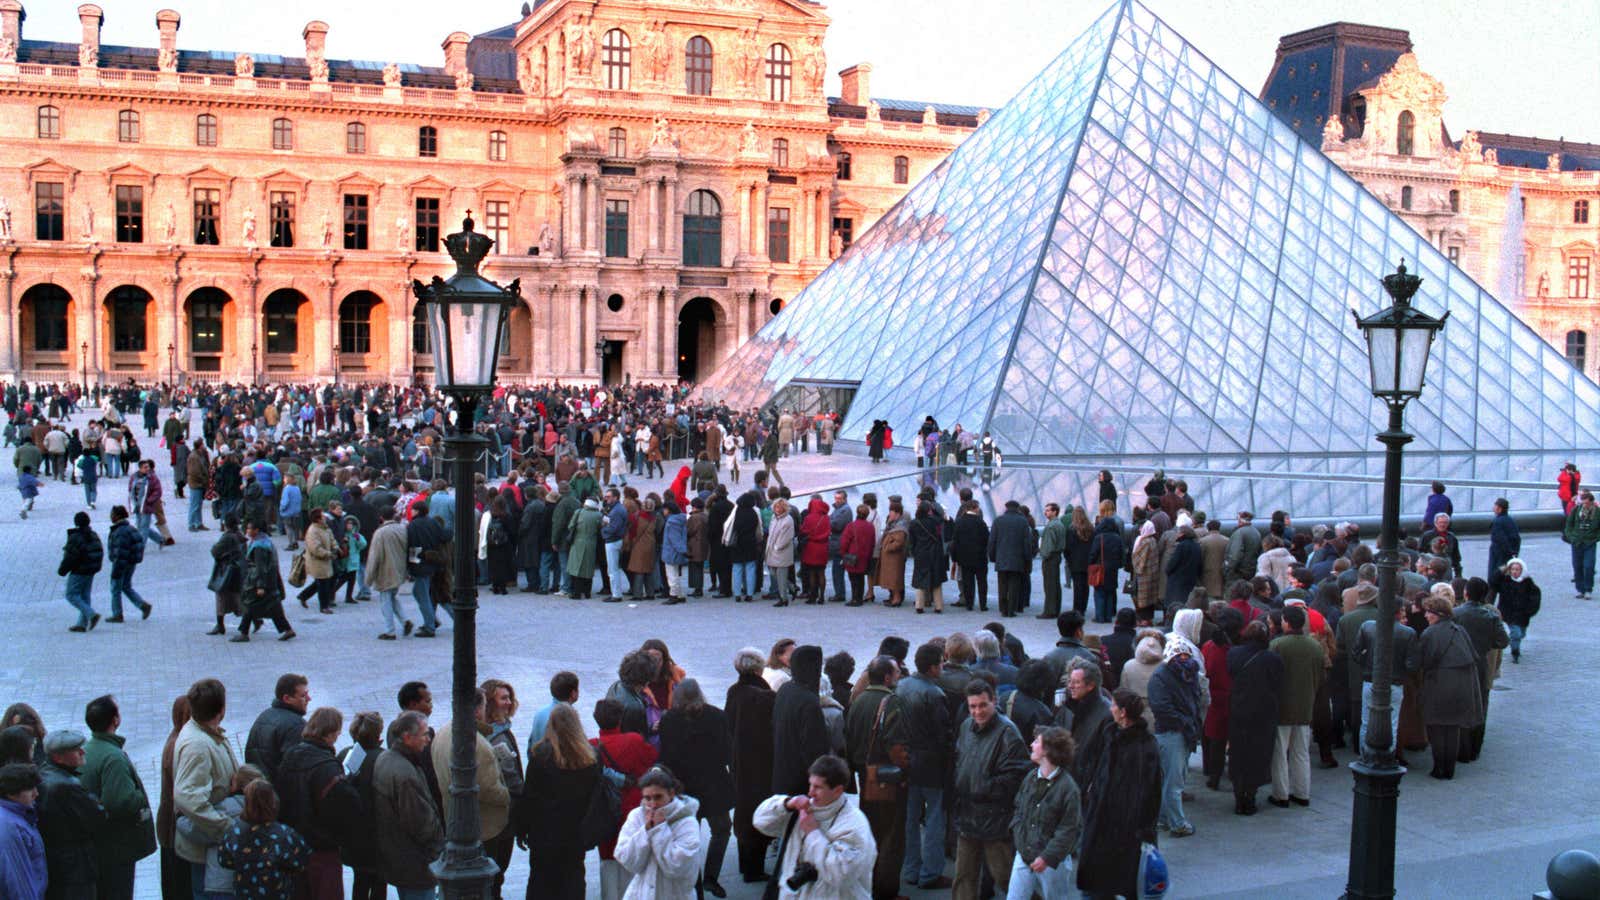 We’ve got a lot to learn from the Louvre.